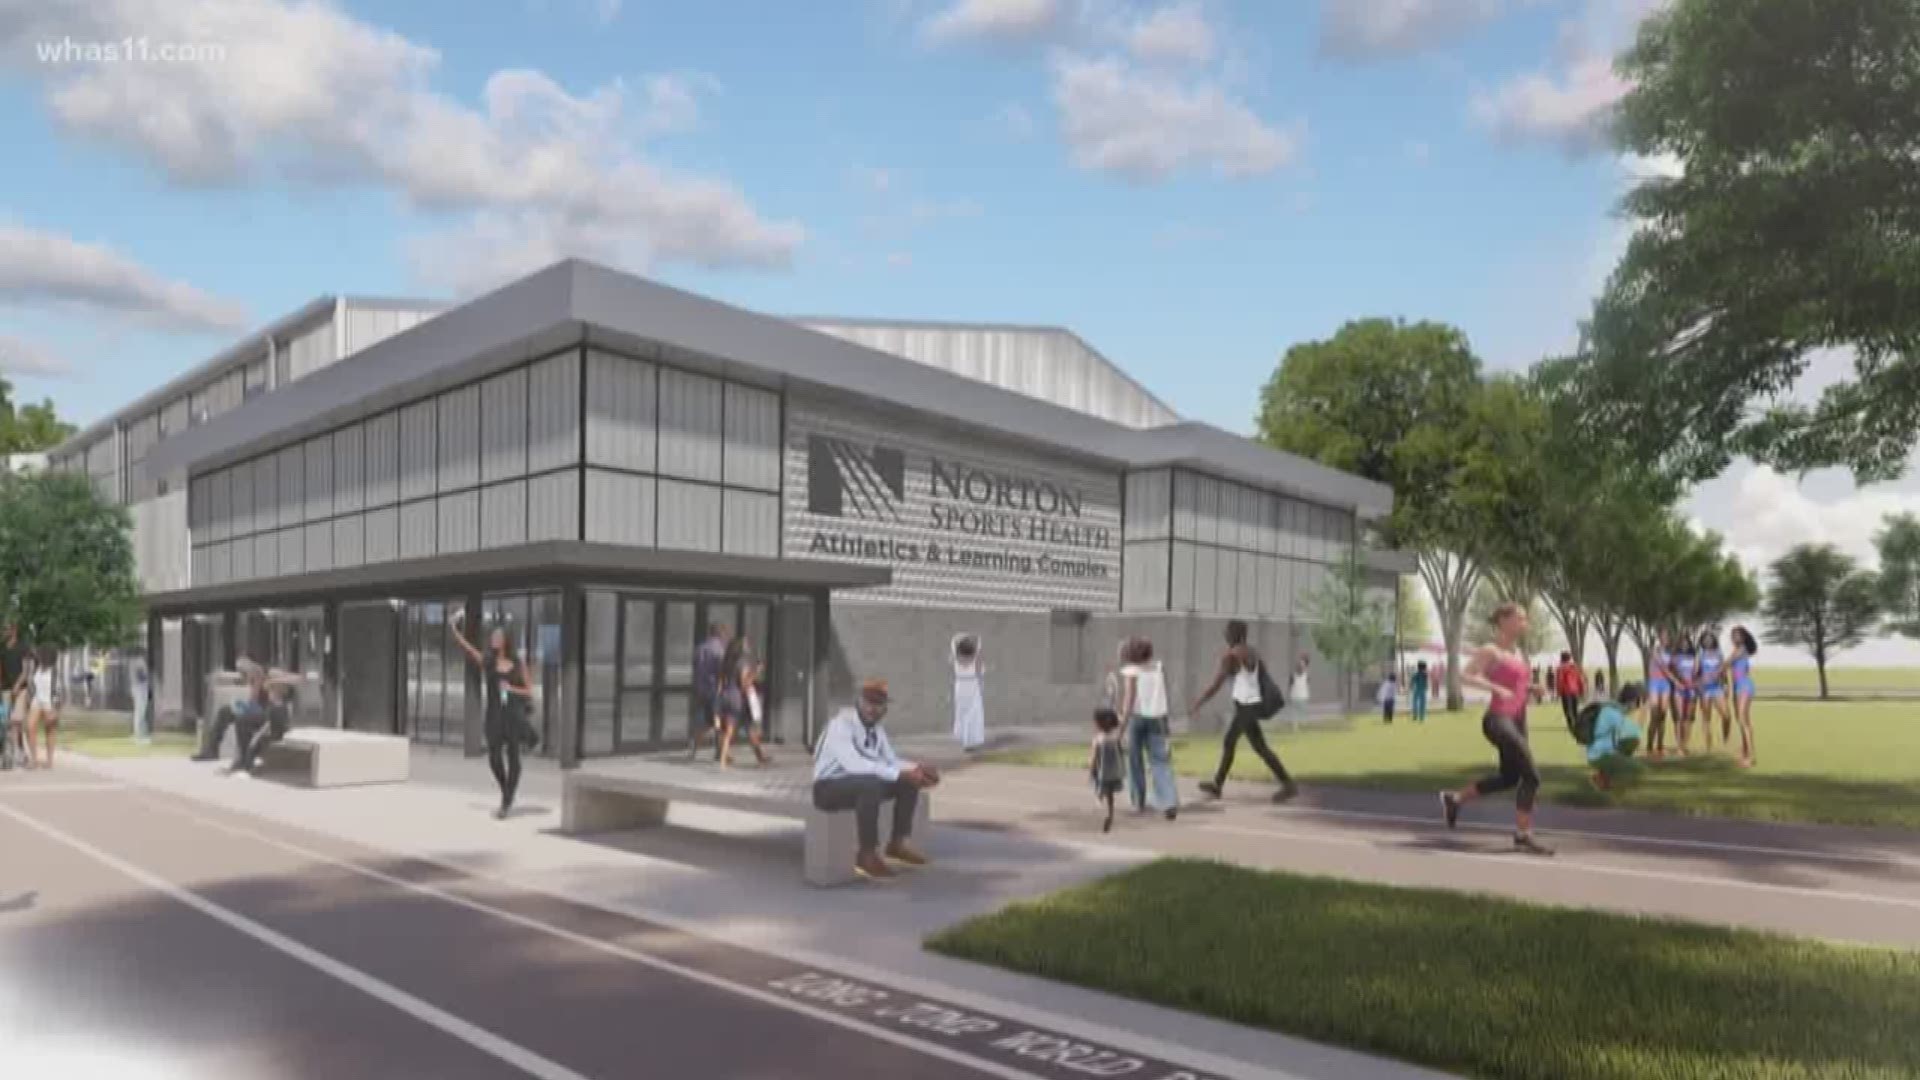 The complex at 30th and Muhammad Ali will be named Norton Sports Health Athletics and Learning Complex.